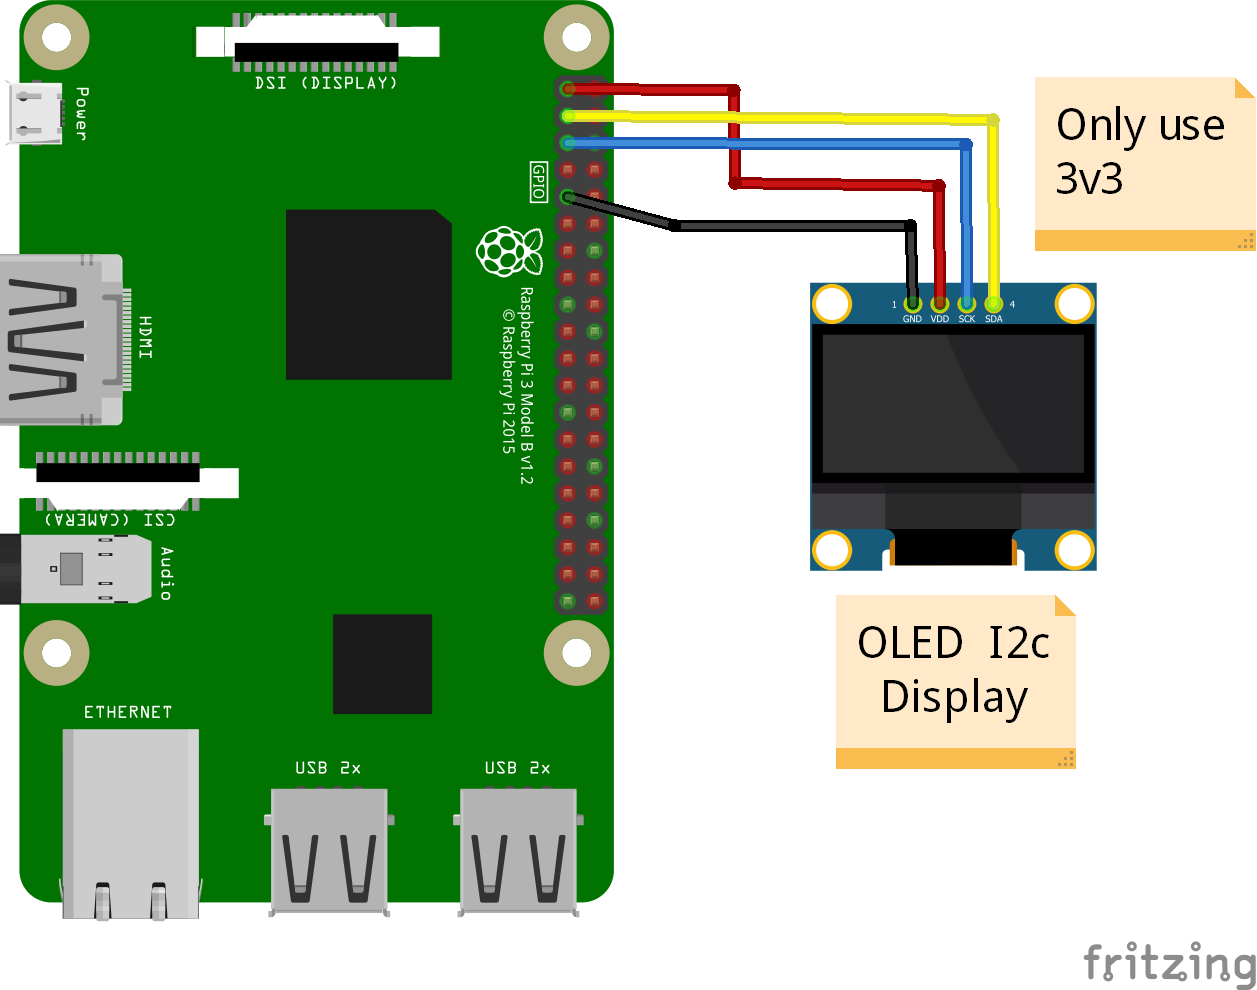 OLED I2c Circuit diagram - (ONLY with 3v3 displays)